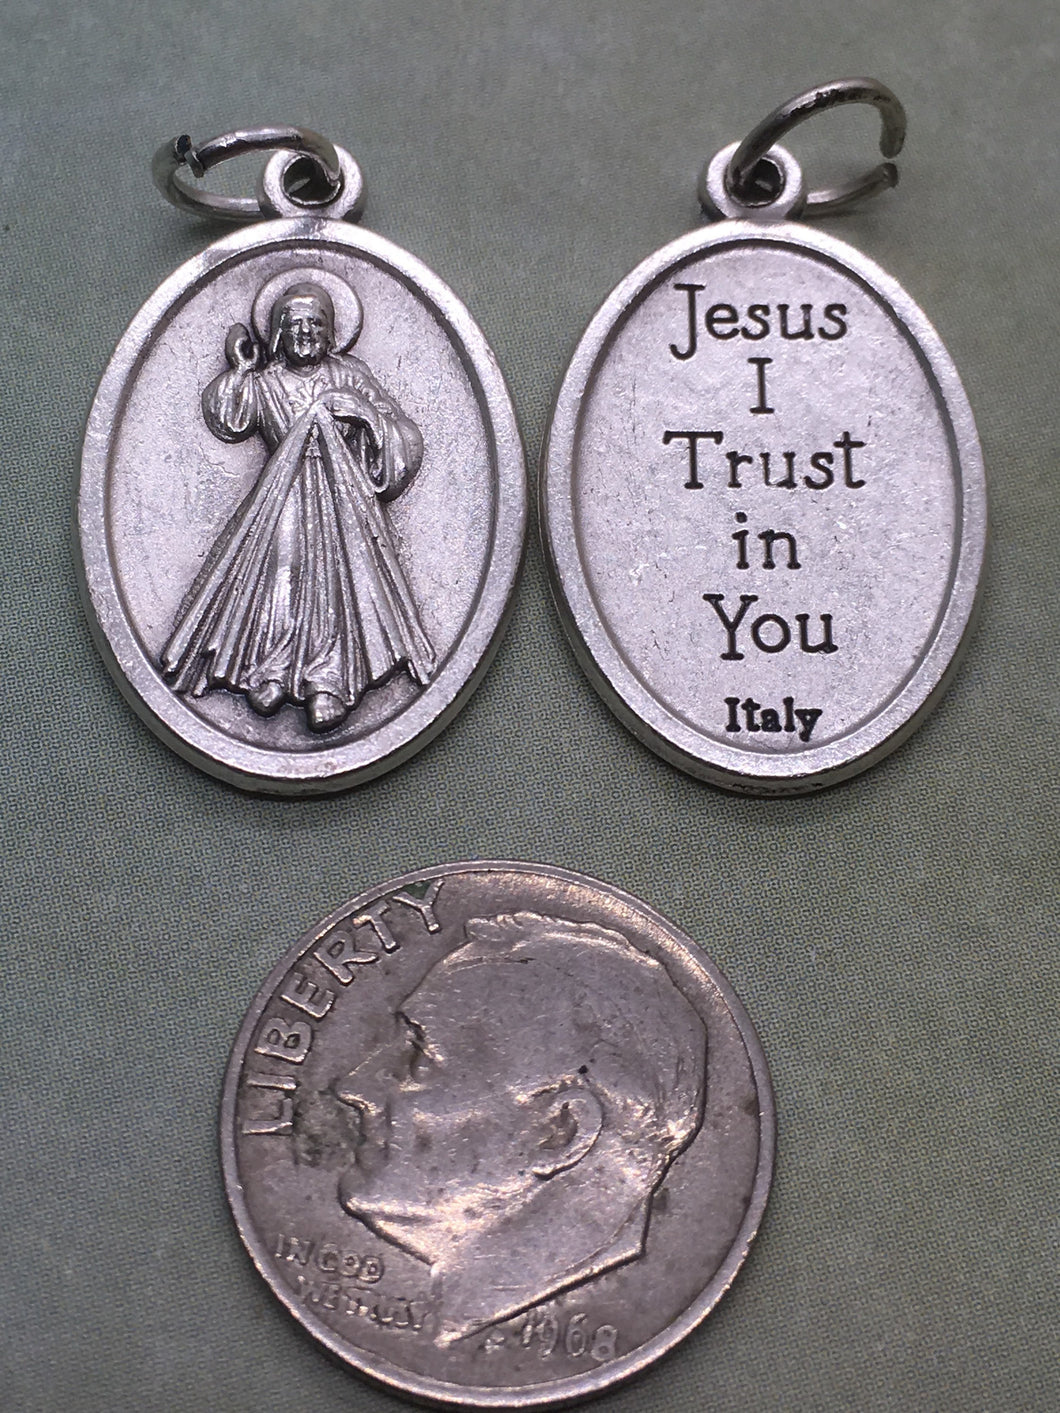 Divine Mercy holy medal - Jesus, I Trust in You